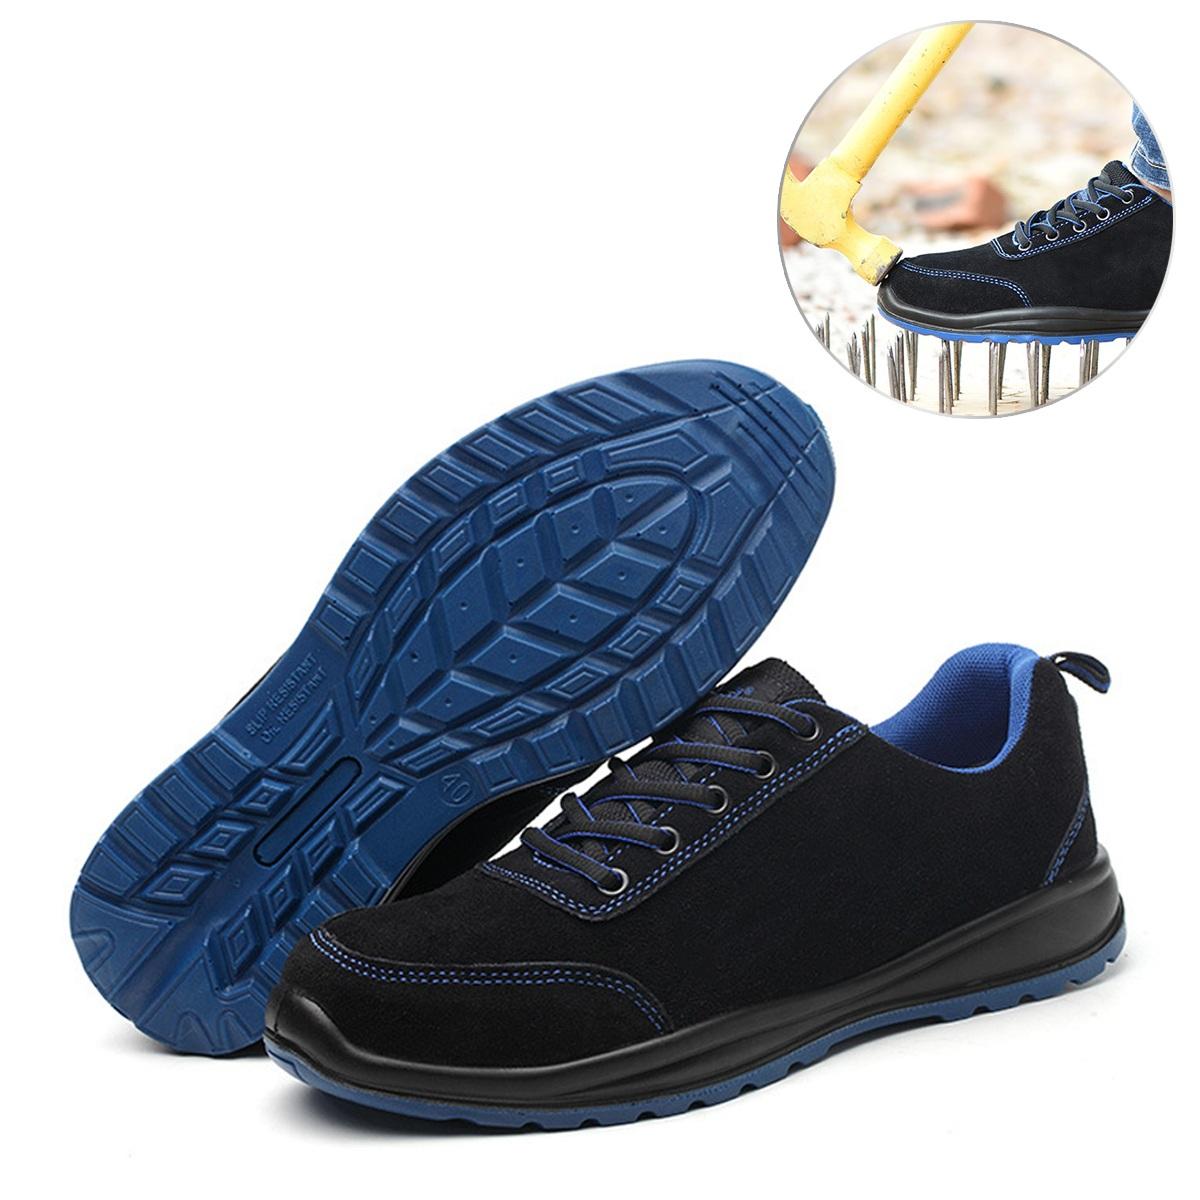 TENGOO Men's Safety Shoes Work Shoes Steel Toe Wearable Anti-Smashing Non-Slip Running Sports Sneakers